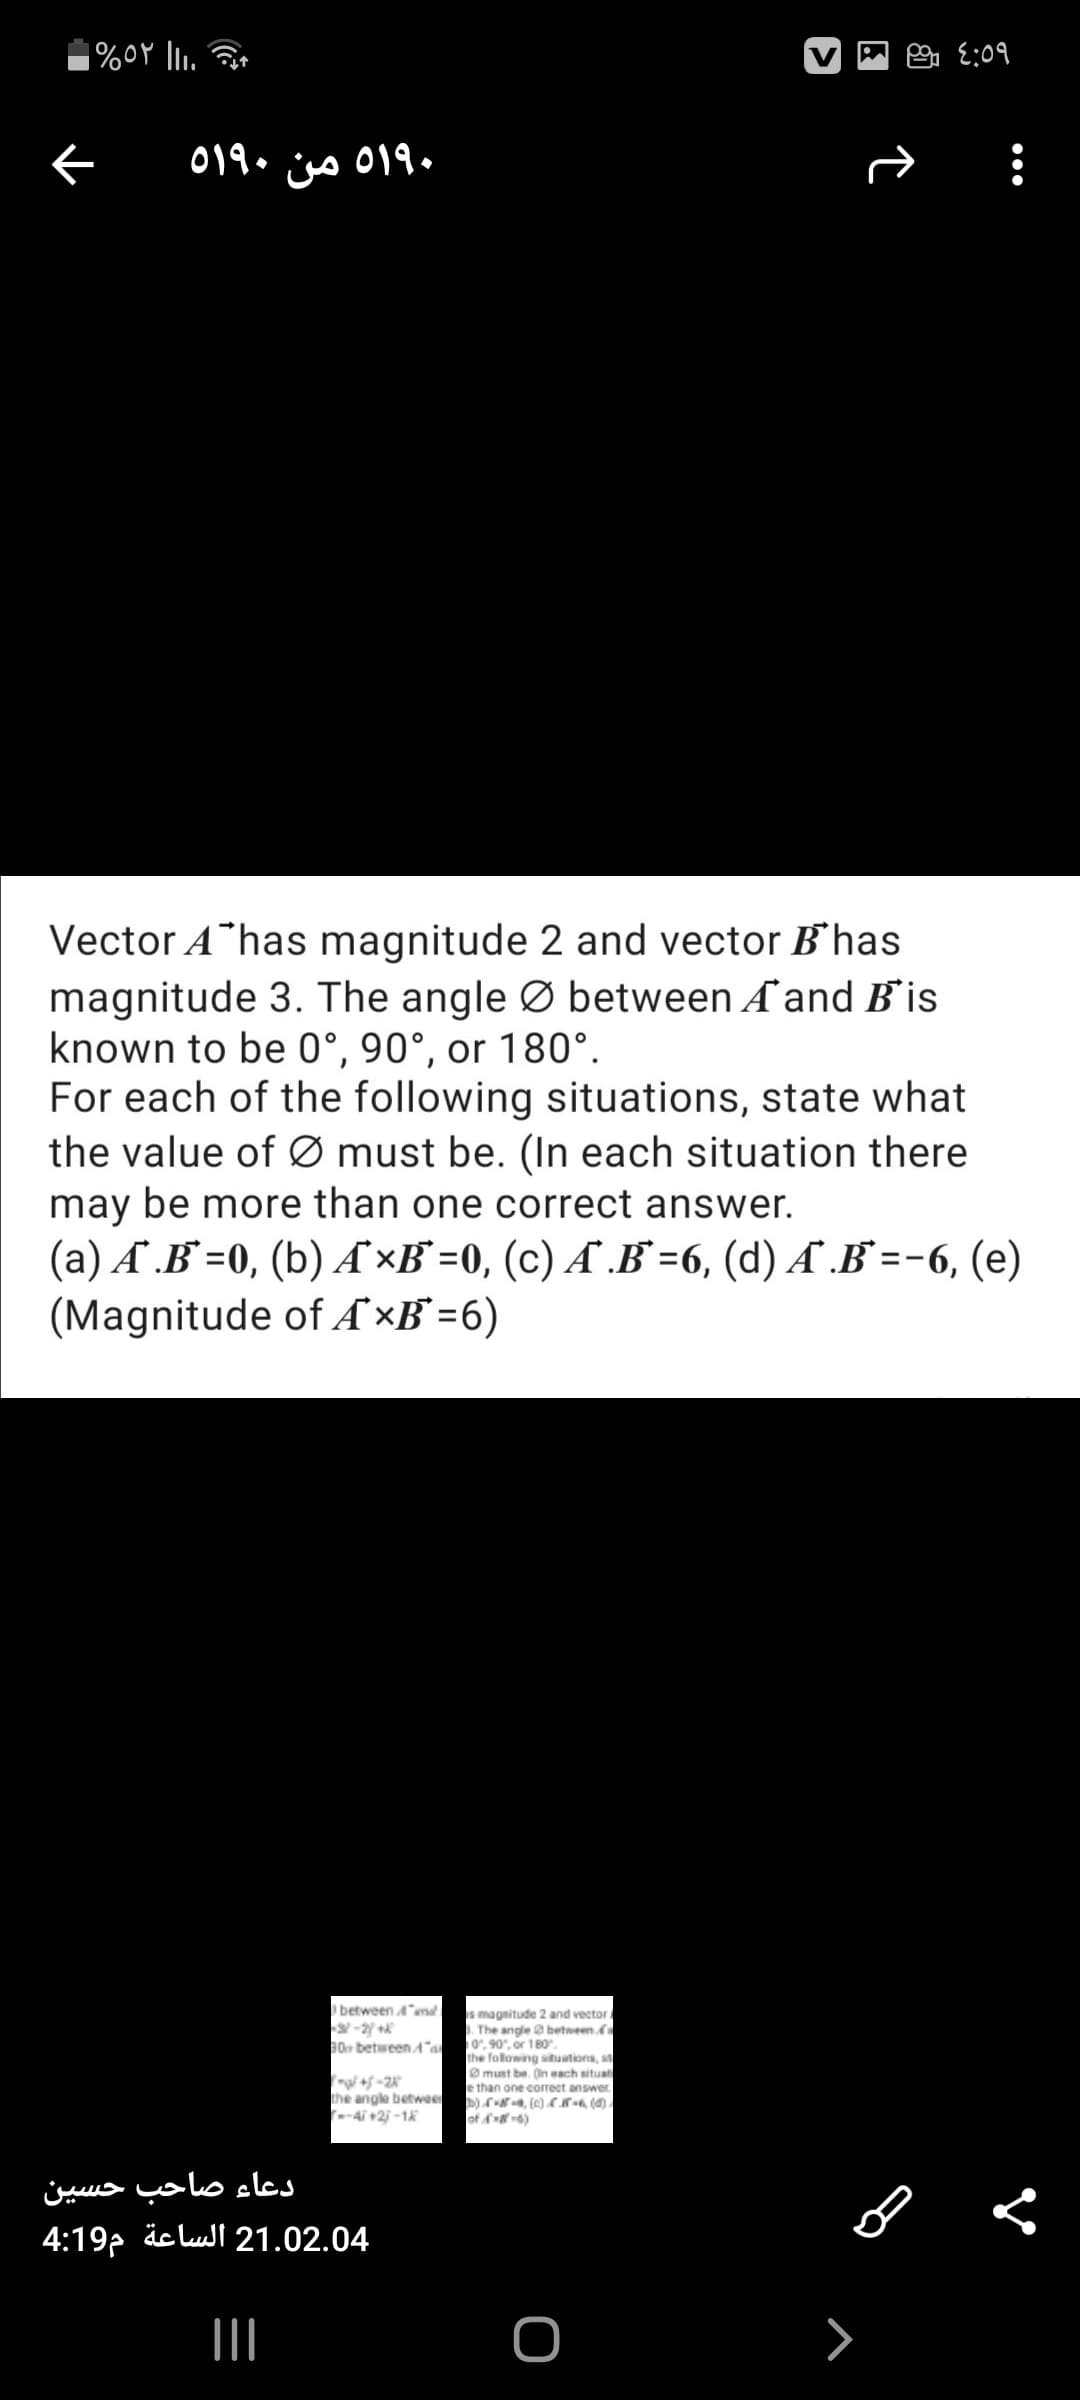 |%oY li.
019. iss 019 •
Vector A has magnitude 2 and vector B'has
magnitude 3. The angle Ø between Ẩ and B is
known to be 0°, 90°, or 180°.
For each of the following situations, state what
the value of Ø must be. (In each situation there
may be more than one correct answer.
(a) Ẩ .B`=0, (b) Ẩ ×B° =0, (c) A .B =6, (d) Ẩ .B =-6, (e)
(Magnitude of Ẩ ×B° =6)
between 4md
s magnitude 2 and vector /
. The angle a betweenfa
0", 90", or 180.
the folowing situations, st
O must be. On each situat
e than one correct answer
30 betweenA"a
the angle betwe
-4i +2 -1
of 6)
دعاء صاحب حسین
4:19, äc luI 21.02.04
II
